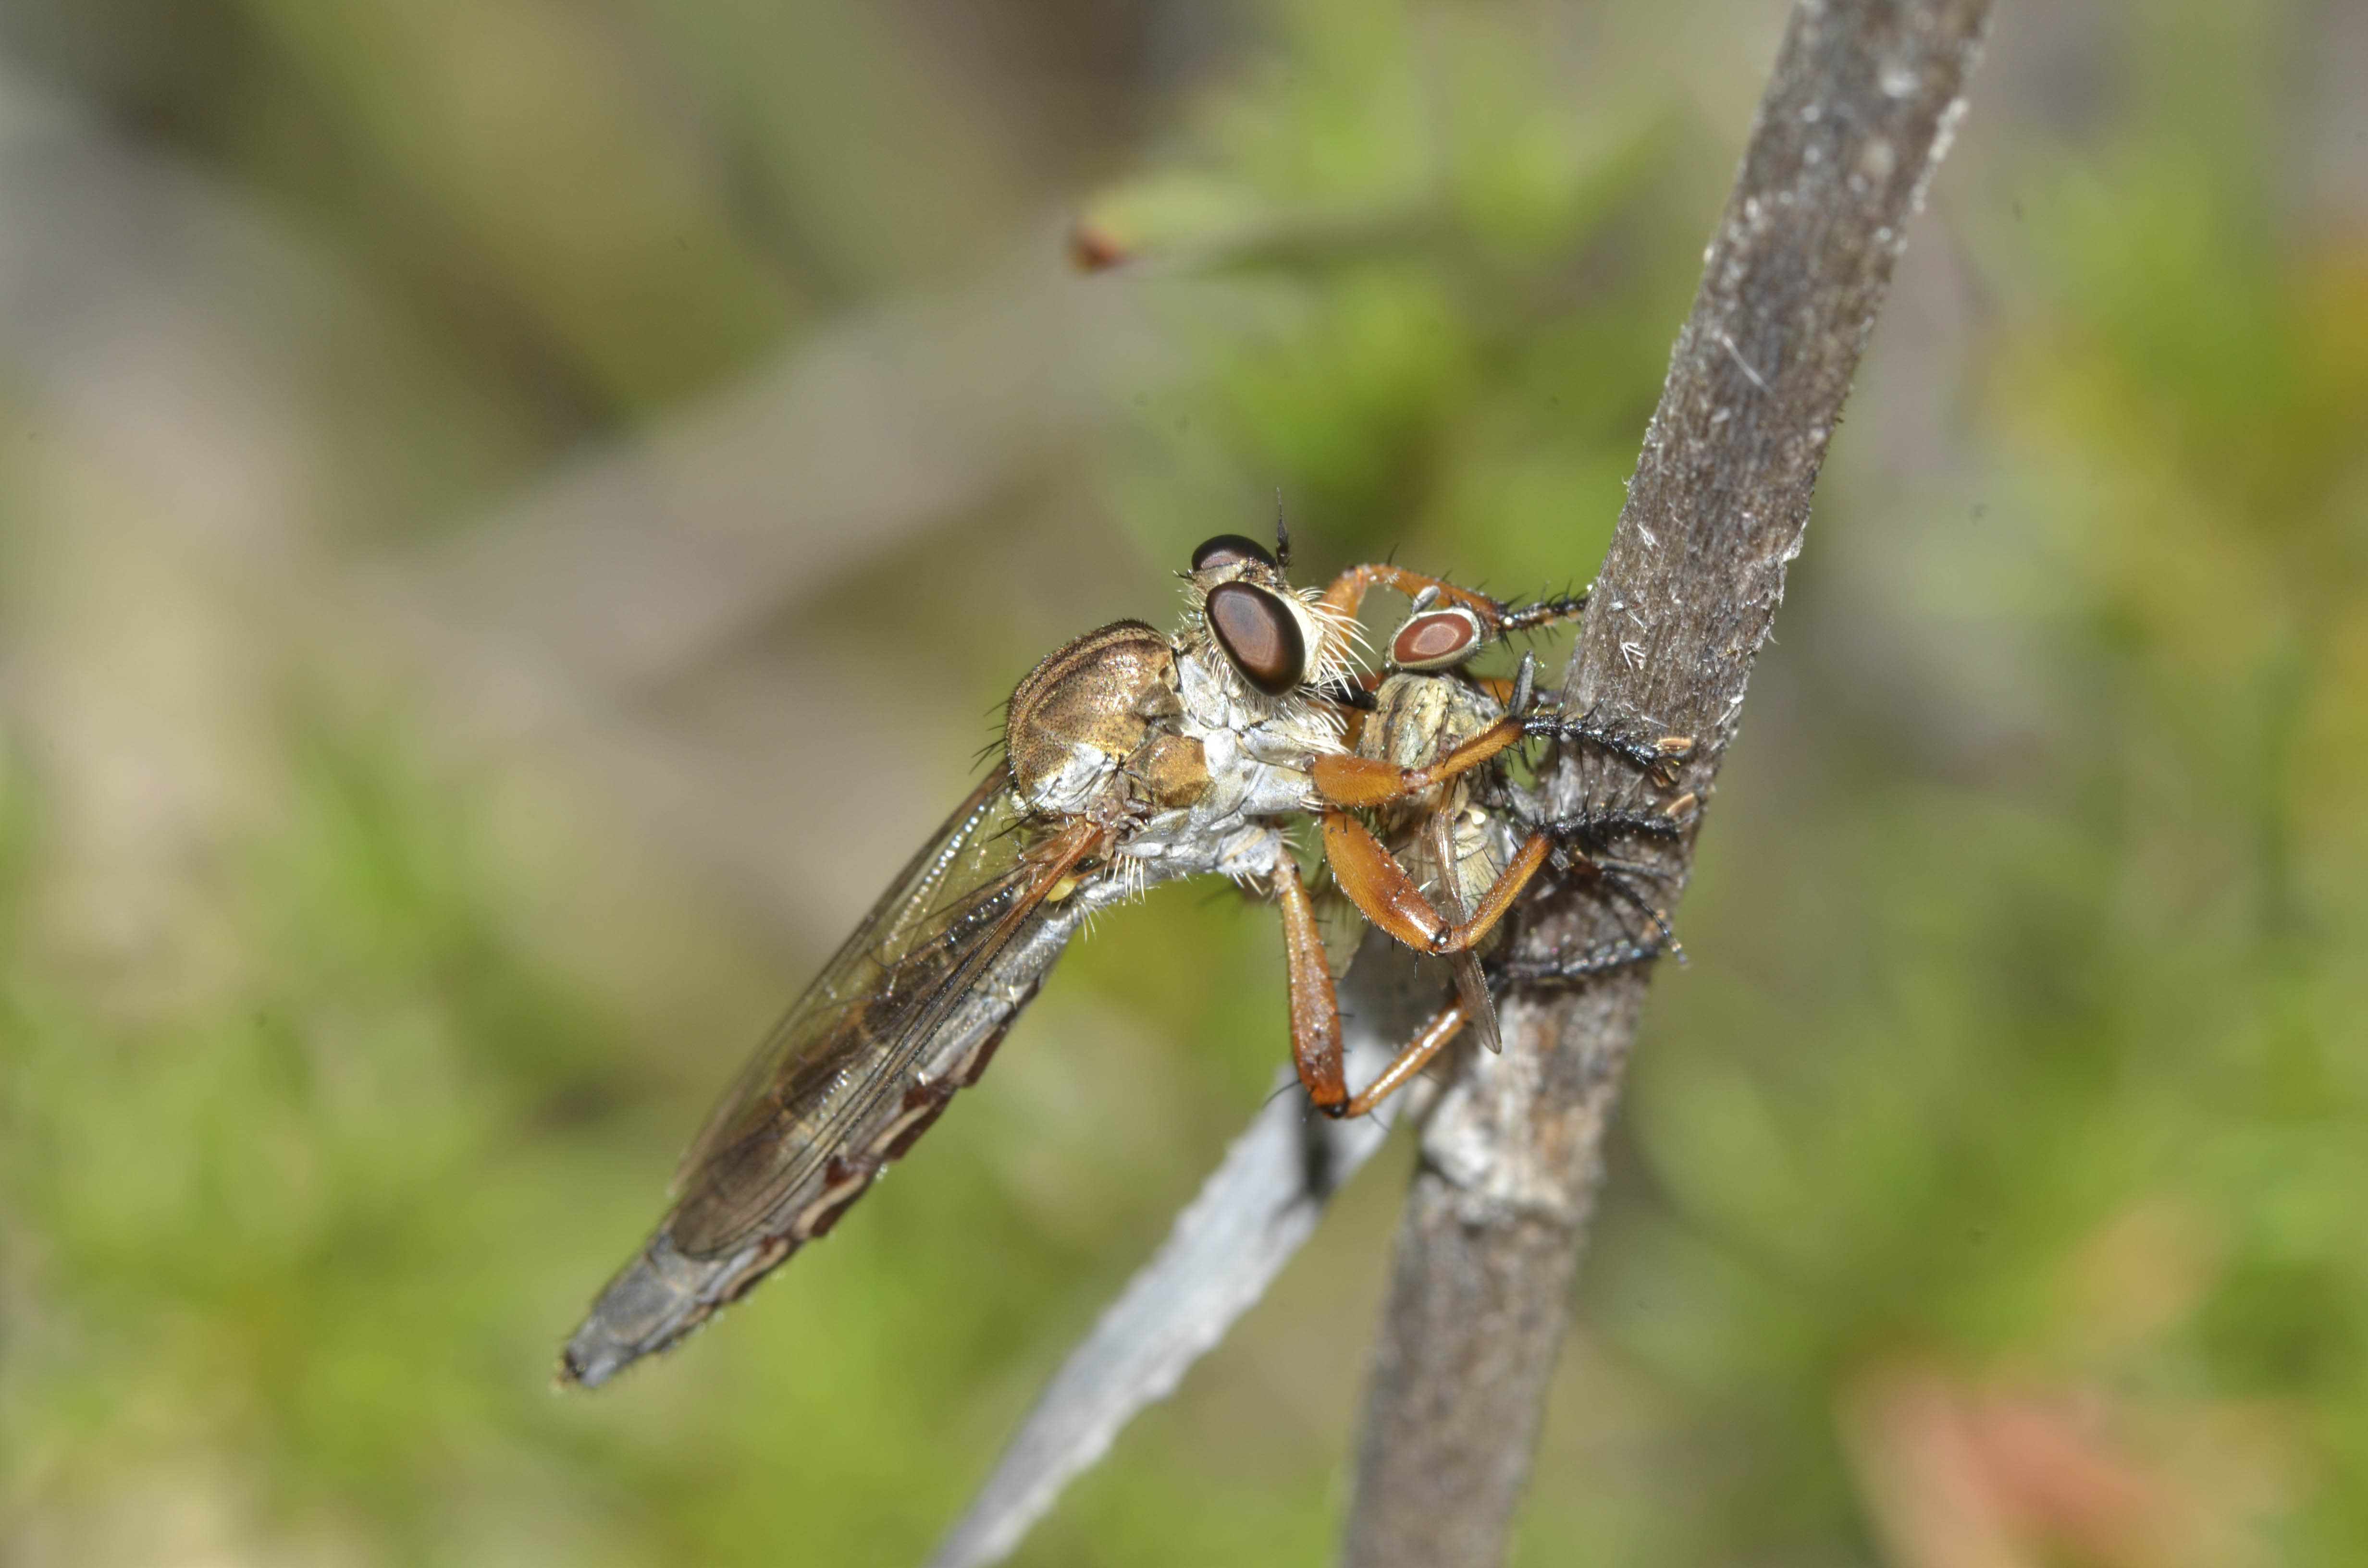 Killer Insect profile: The Assassin Fly | Smithsonian Insider